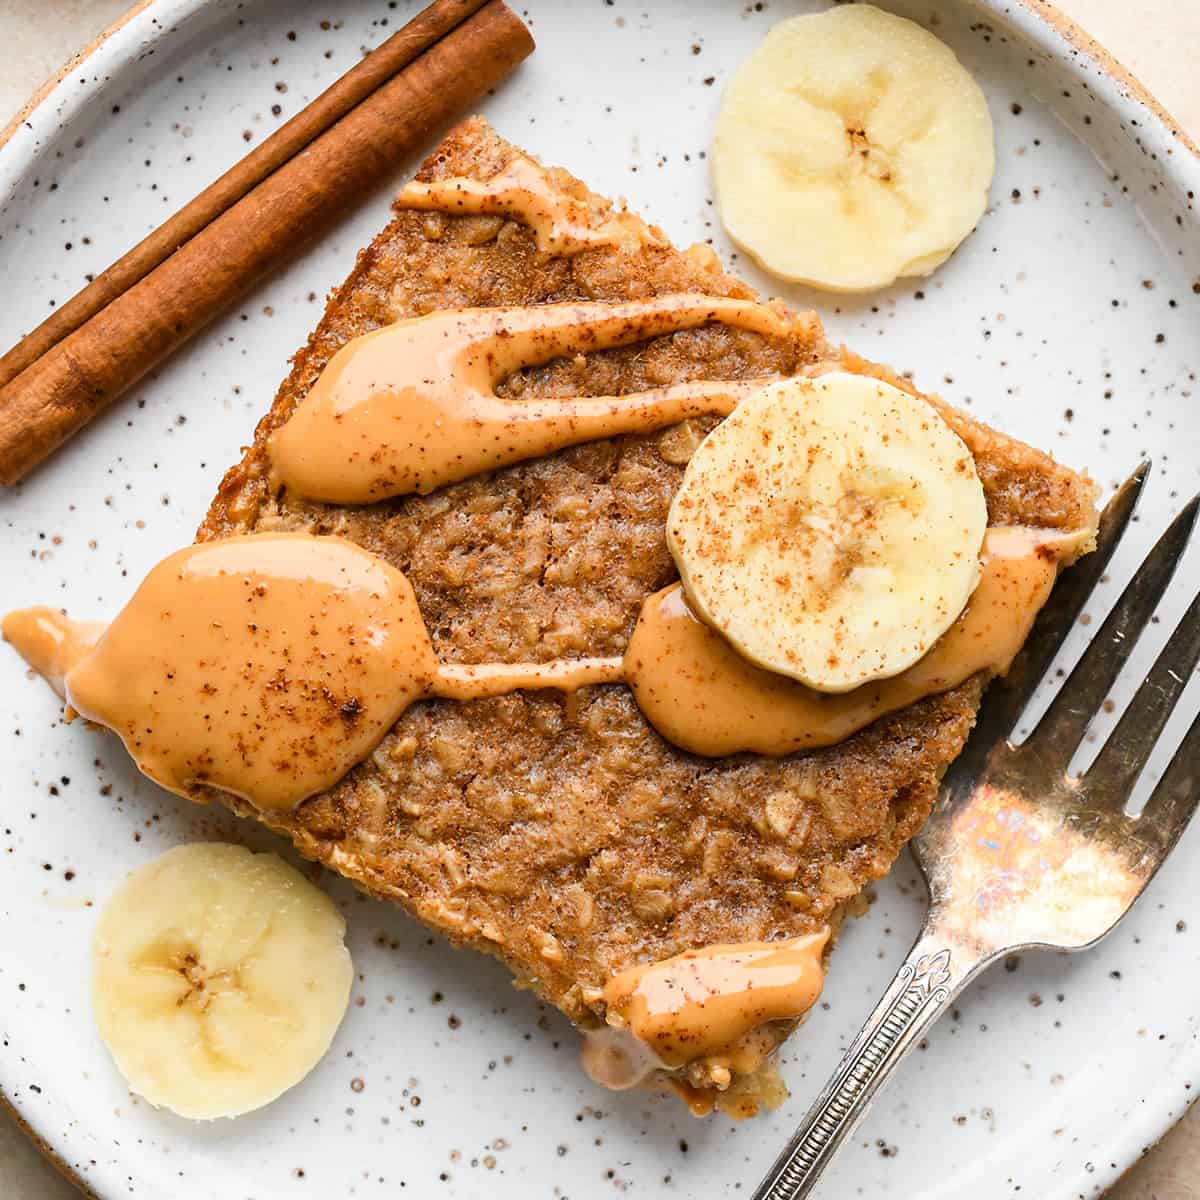 a piece of Peanut Butter Banana Baked Oatmeal on a plate with a drizzle of peanut butter, bananas and a fork